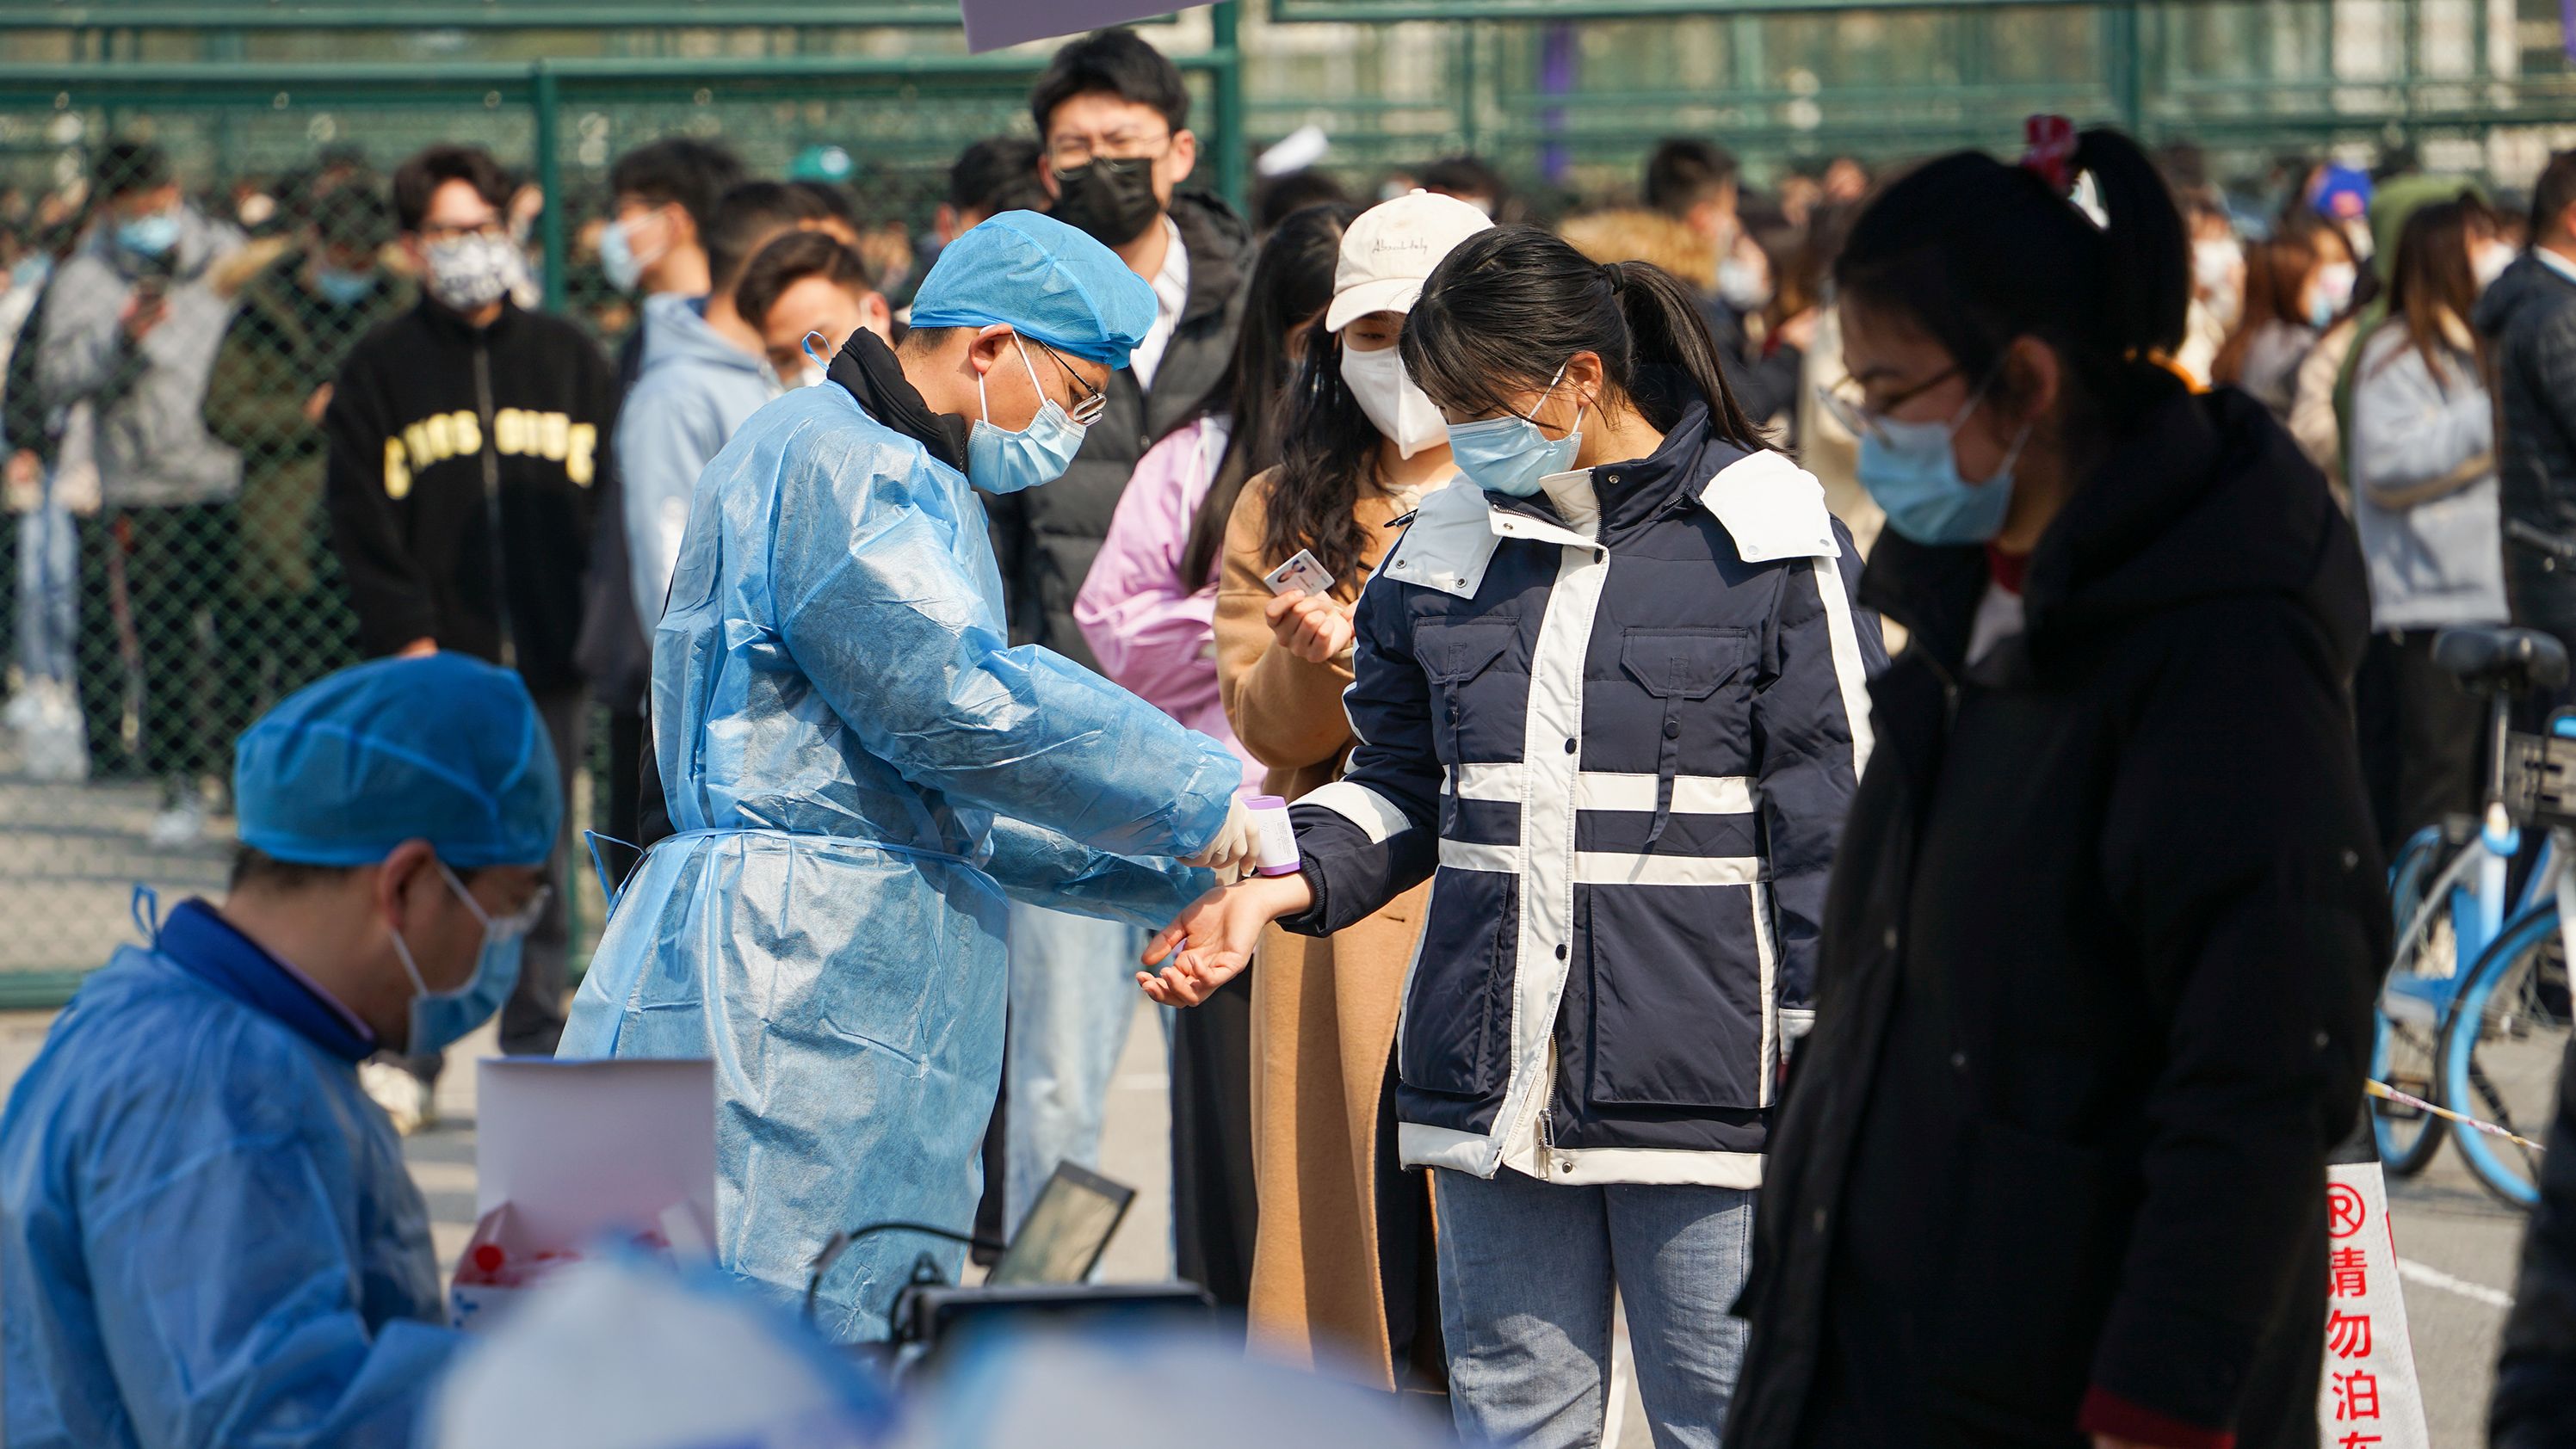 Students line up for Covid-19 testing at Qingdao Agricultural University on March 7 in China's Qingdao city.